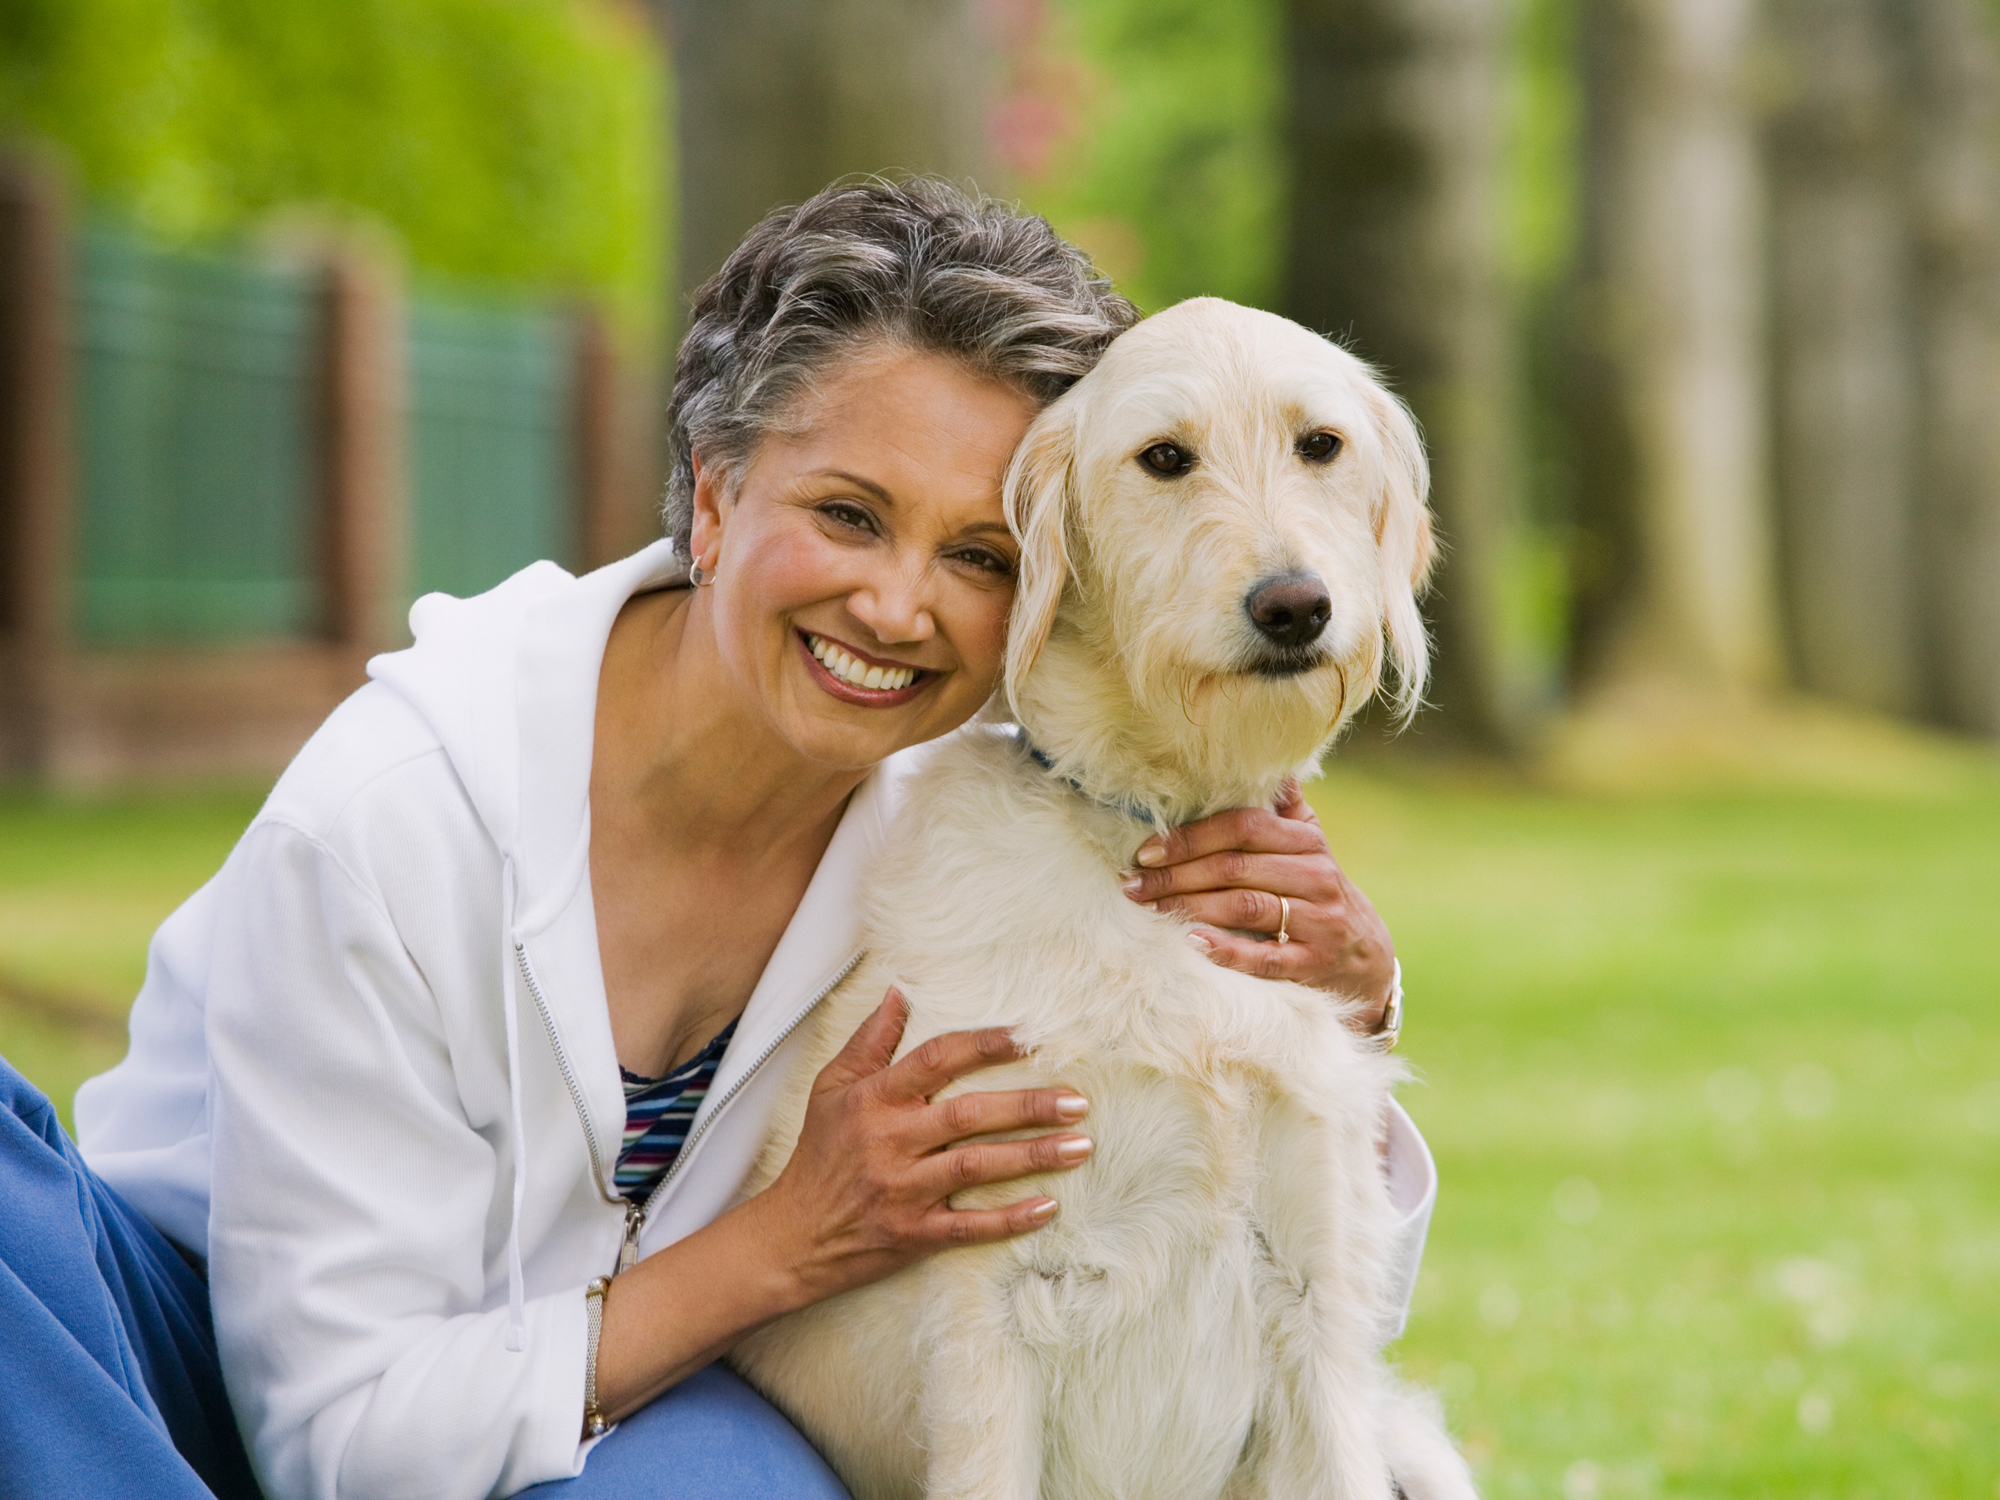 7 ways dog owners are healthier and live longer